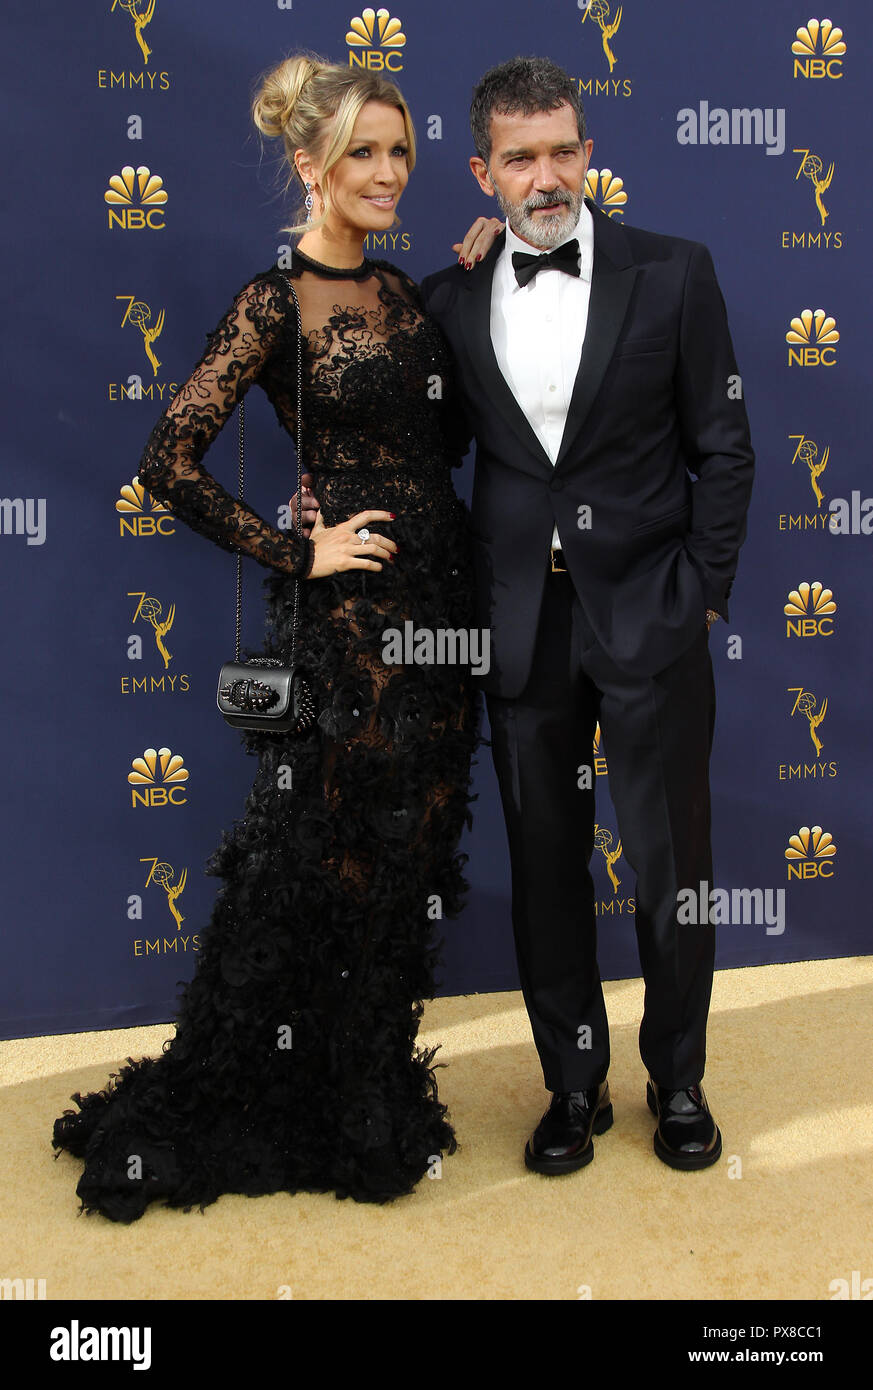 70th Emmy Awards (2018) Arrivals held at the Microsoft Theater in Los Angeles, California.  Featuring: Nicole Kimpel, Antonio Banderas Where: Los Angeles, California, United States When: 17 Sep 2018 Credit: Adriana M. Barraza/WENN.com Stock Photo